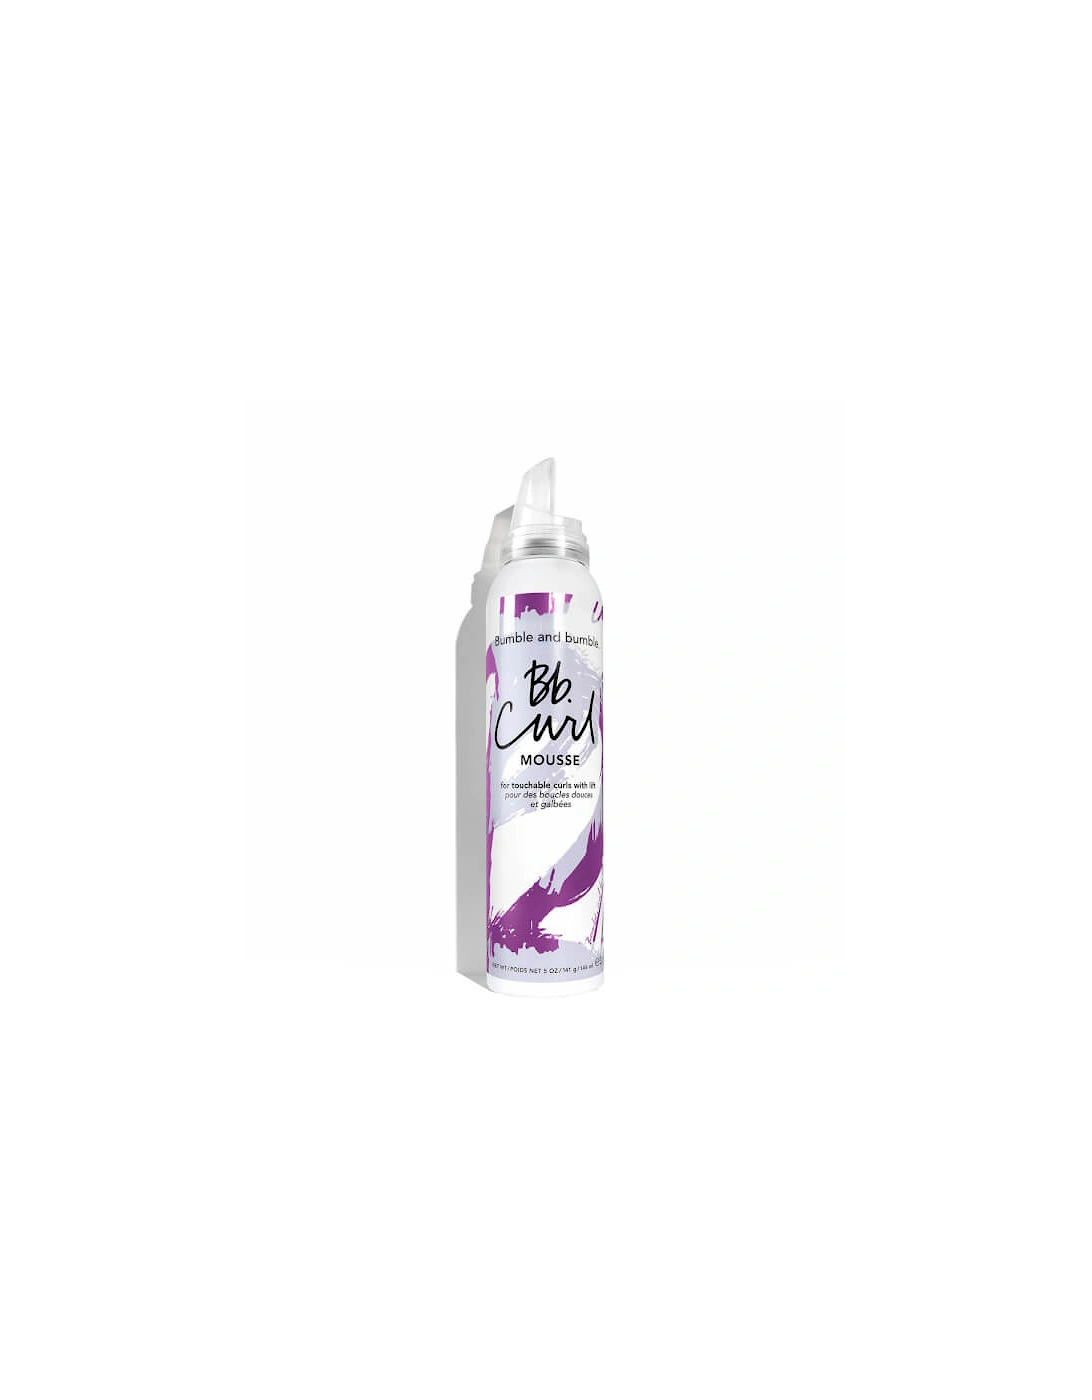 Bumble and bumble Curl Mousse 146ml, 2 of 1